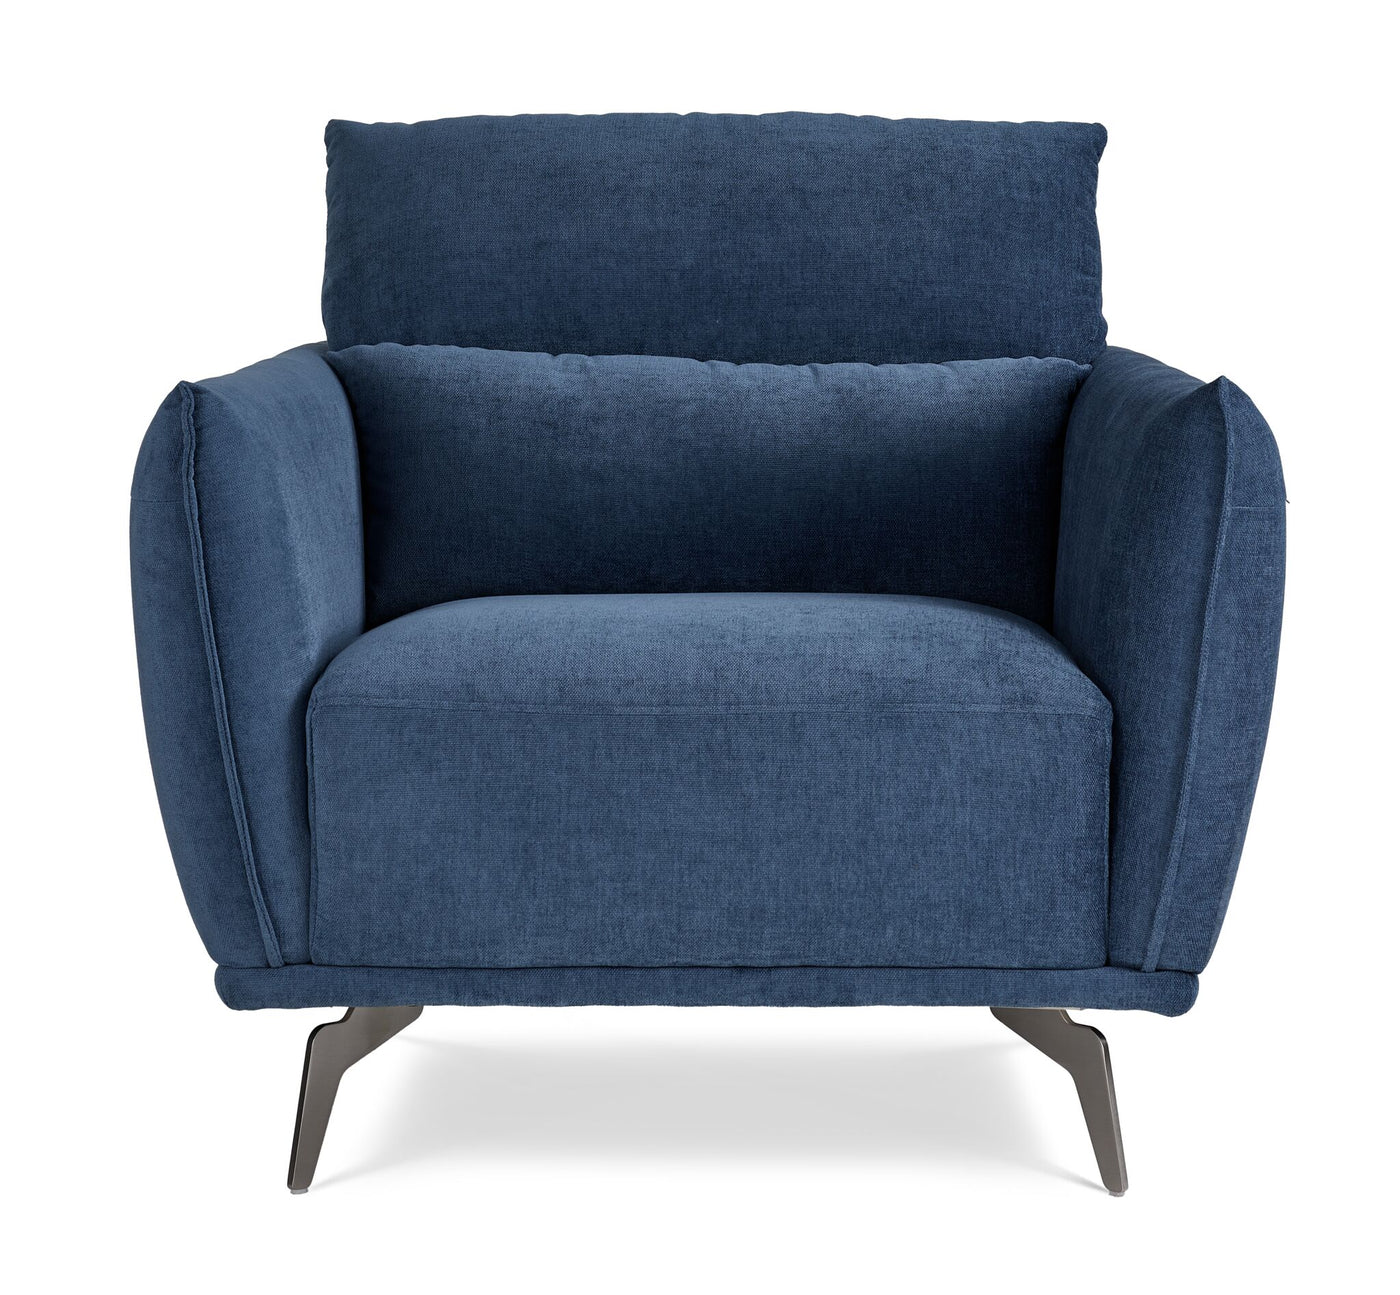 Arie Sofa and Chair Set - Blue